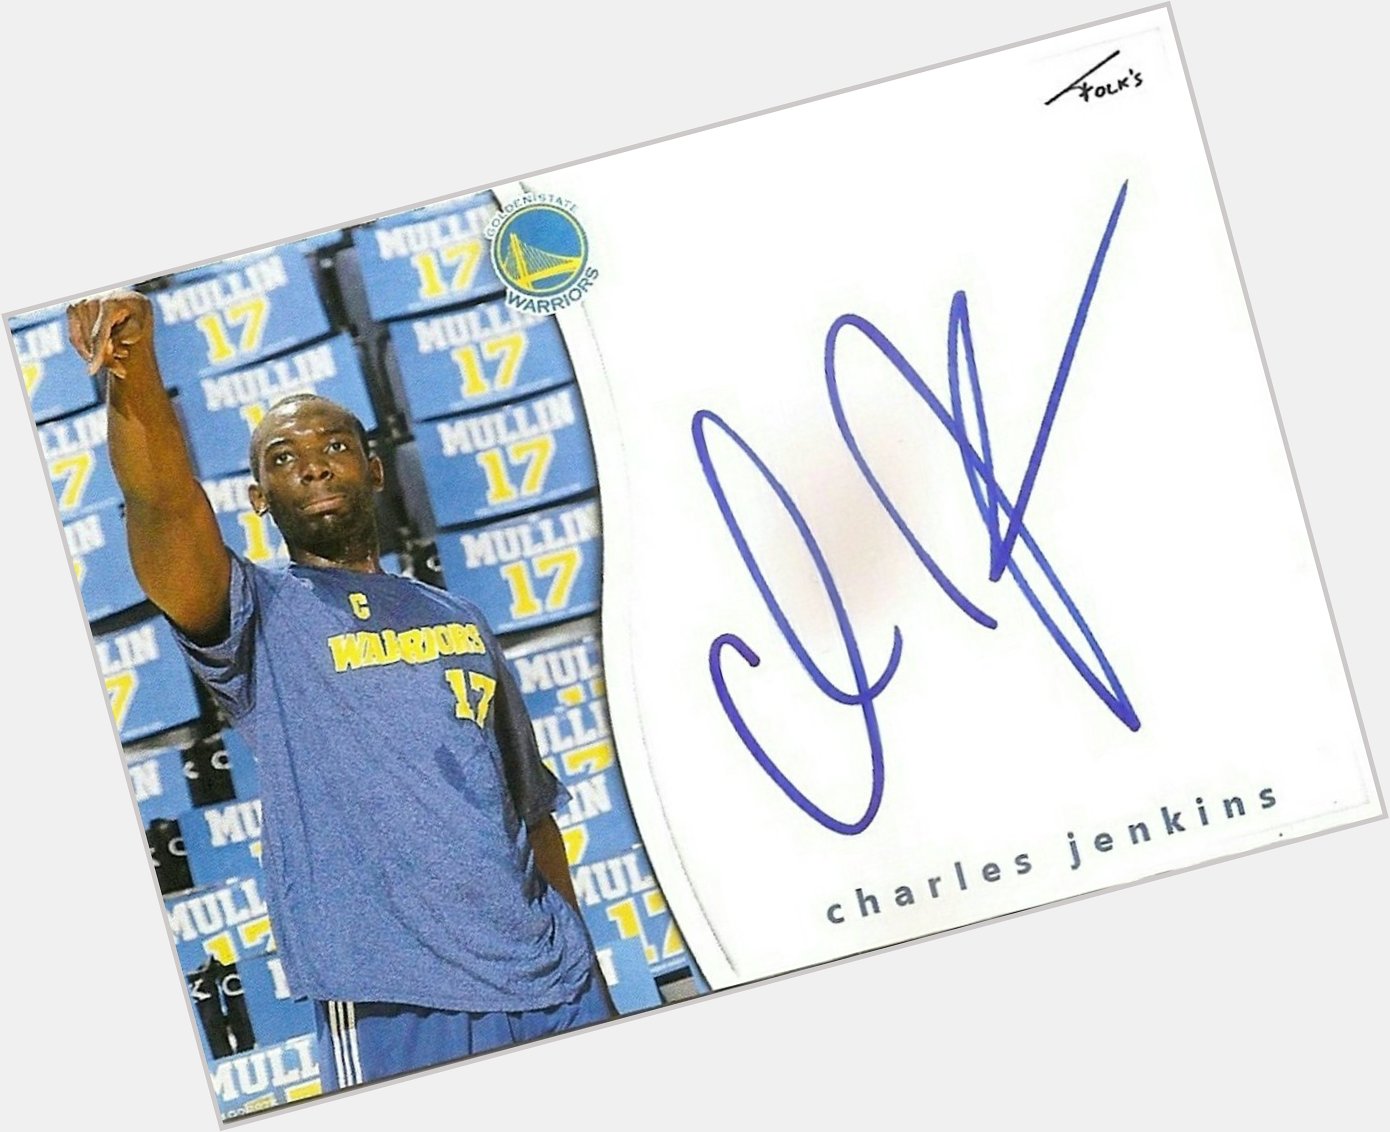 Happy Birthday to Charles Jenkins of who turns 29 today. Enjoy your day 